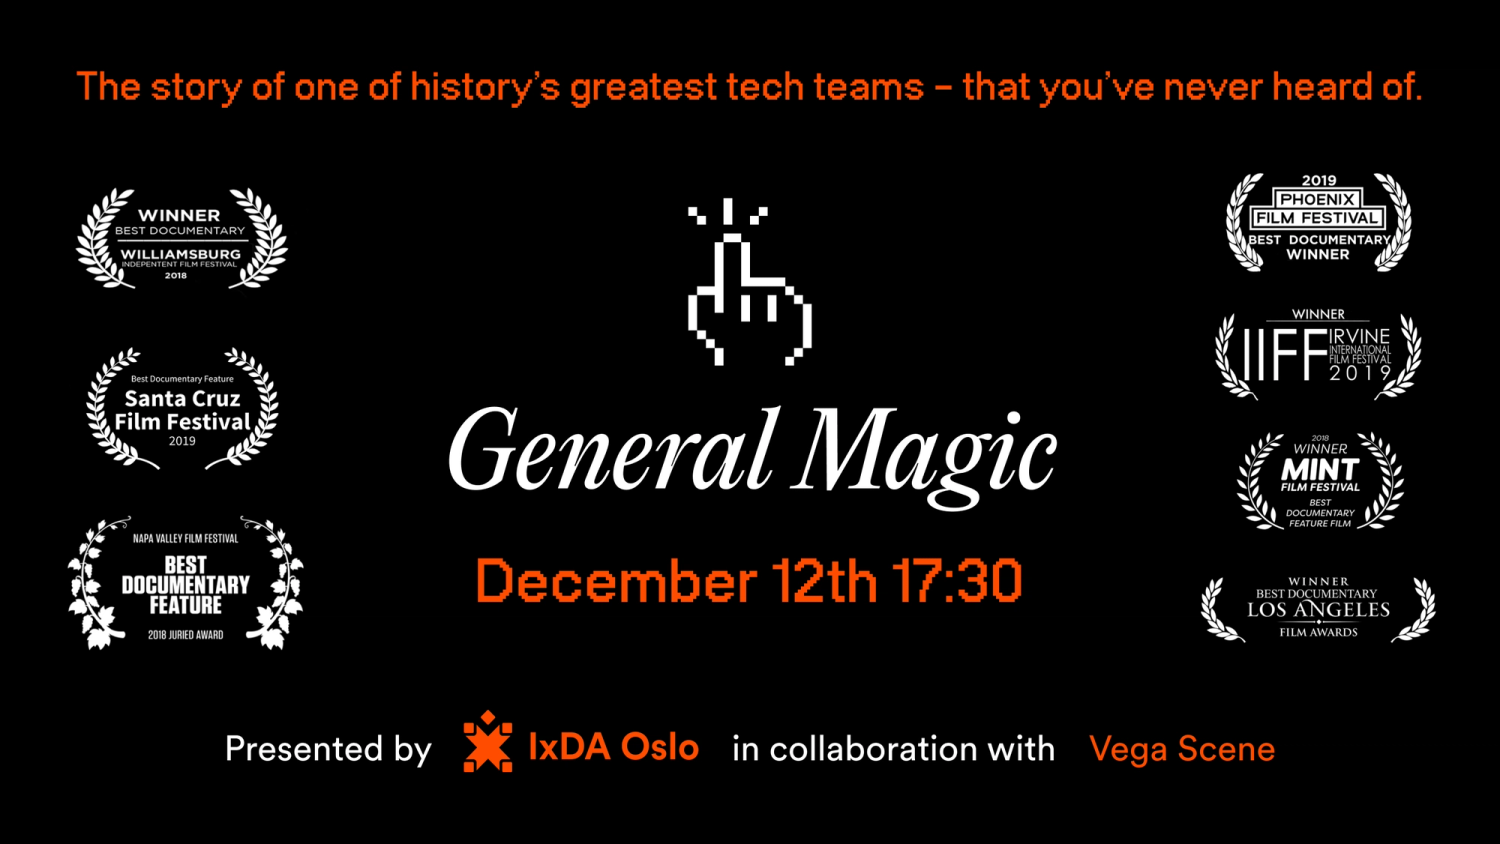 Banner for event, with retro illustration of pixelated hand over the text "General Magic"